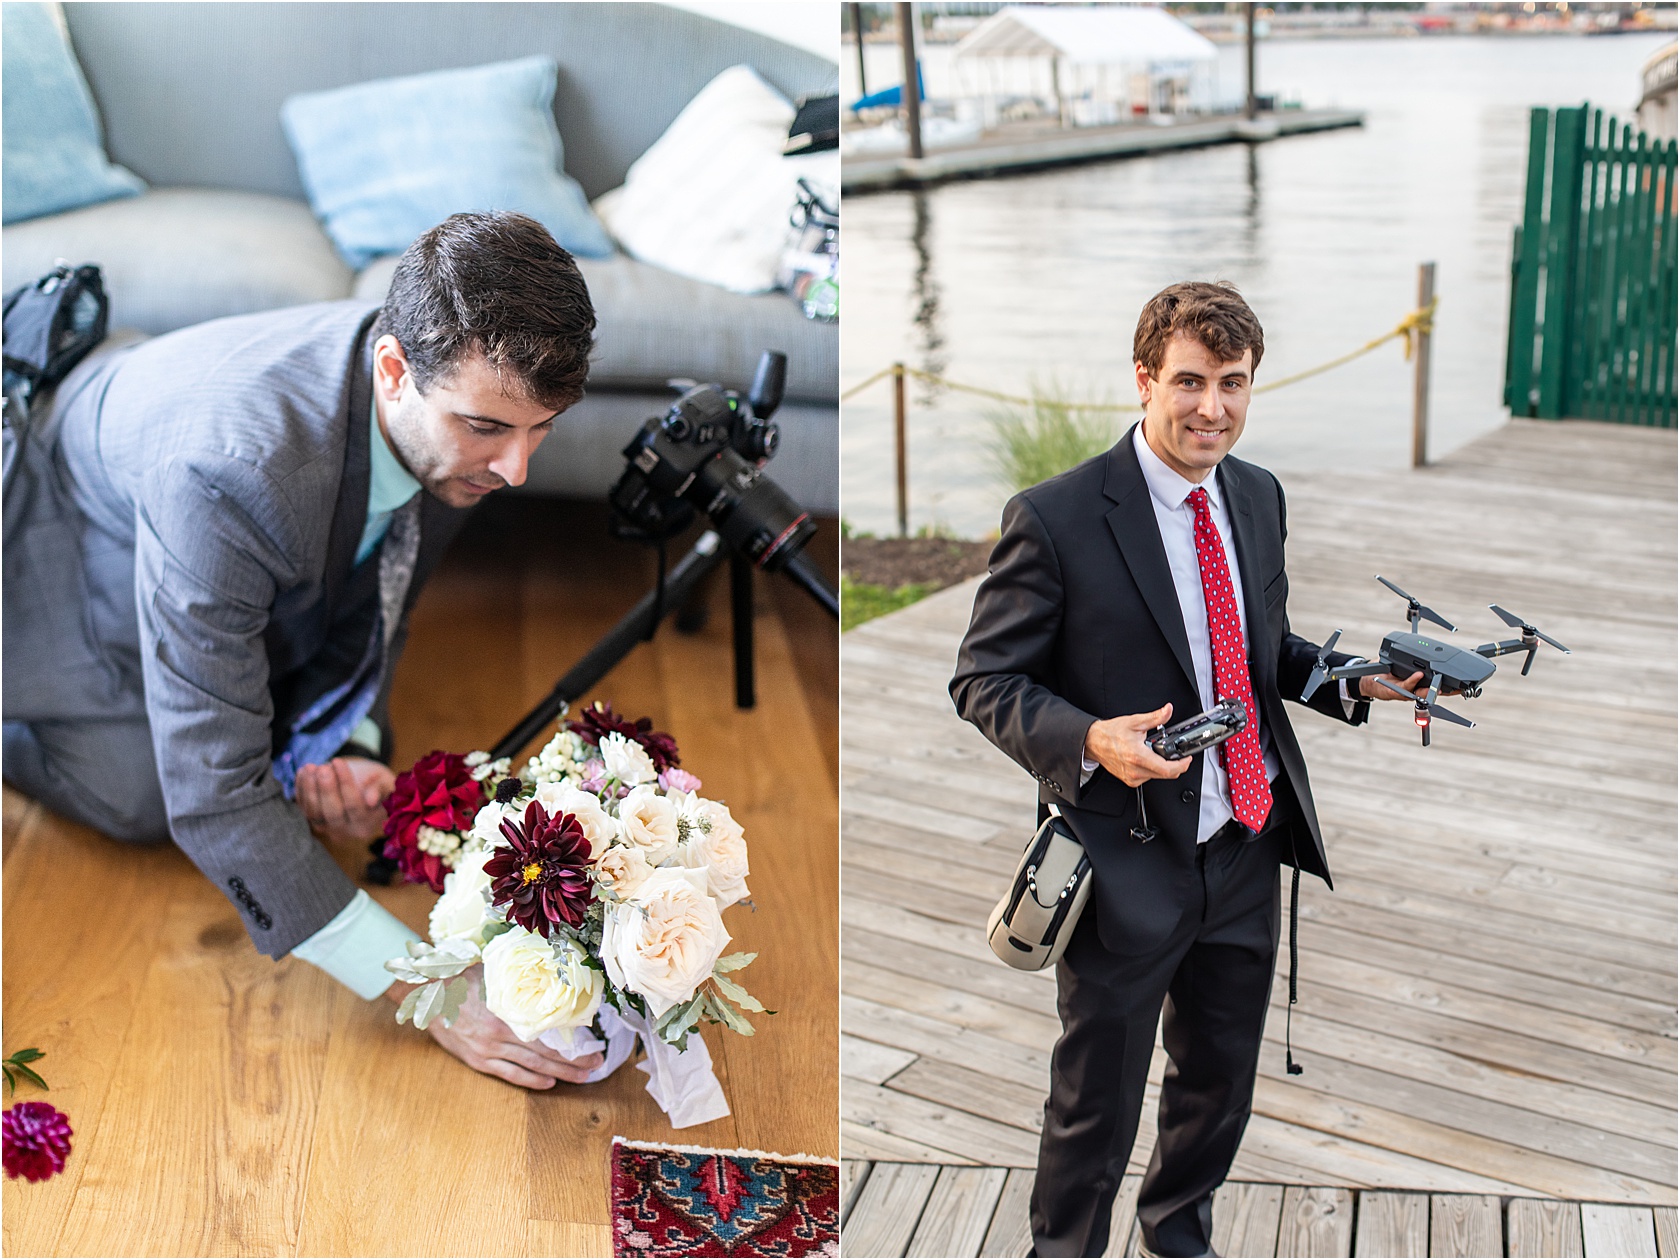  From Drones to Florals, he does it all.  